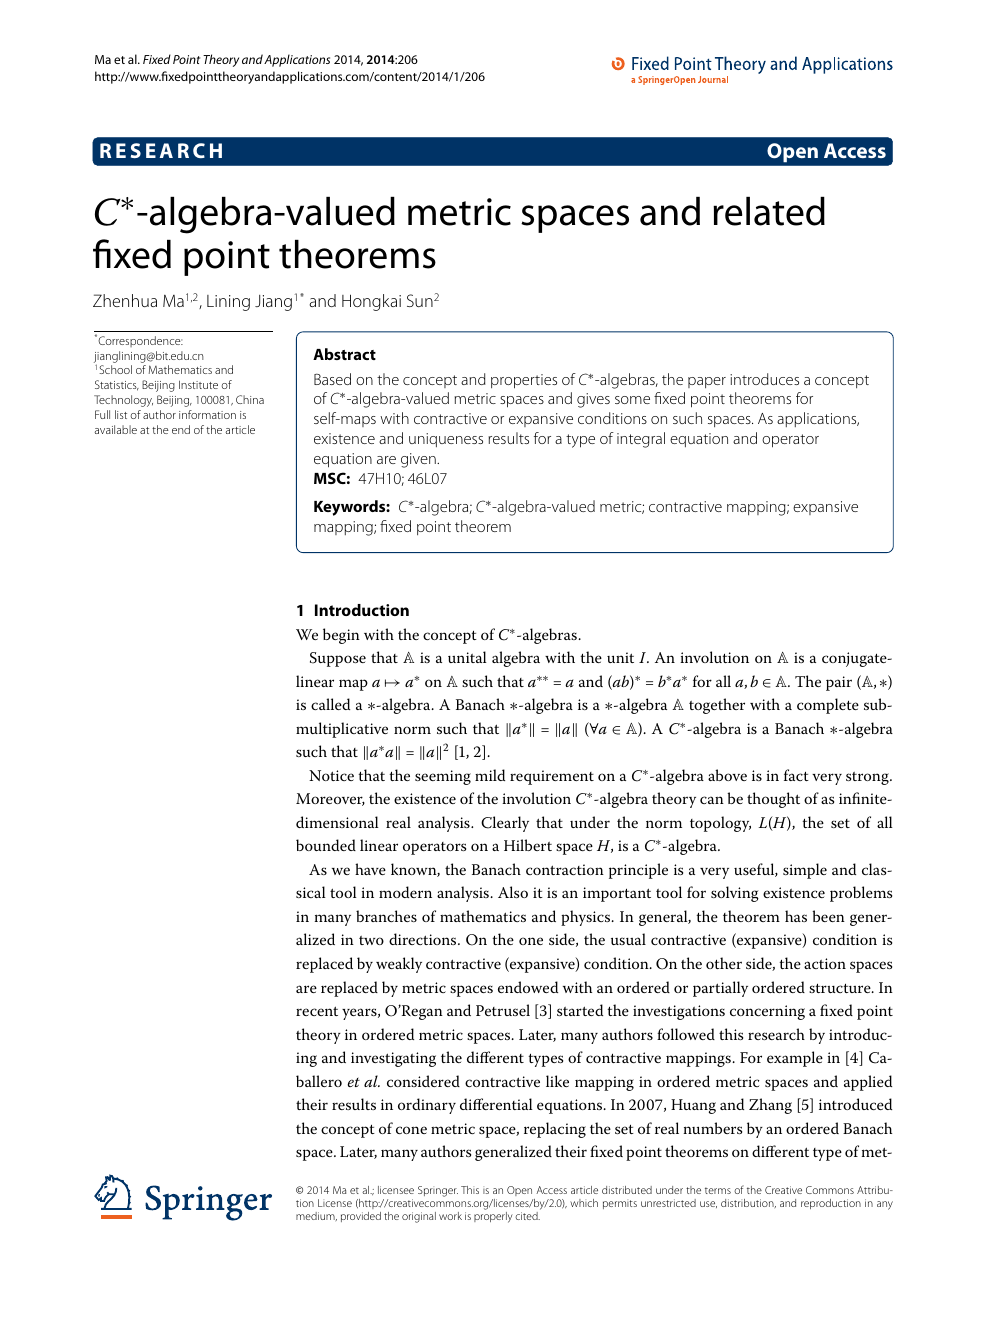 C Algebra Valued Metric Spaces And Related Fixed Point Theorems Topic Of Research Paper In Mathematics Download Scholarly Article Pdf And Read For Free On Cyberleninka Open Science Hub